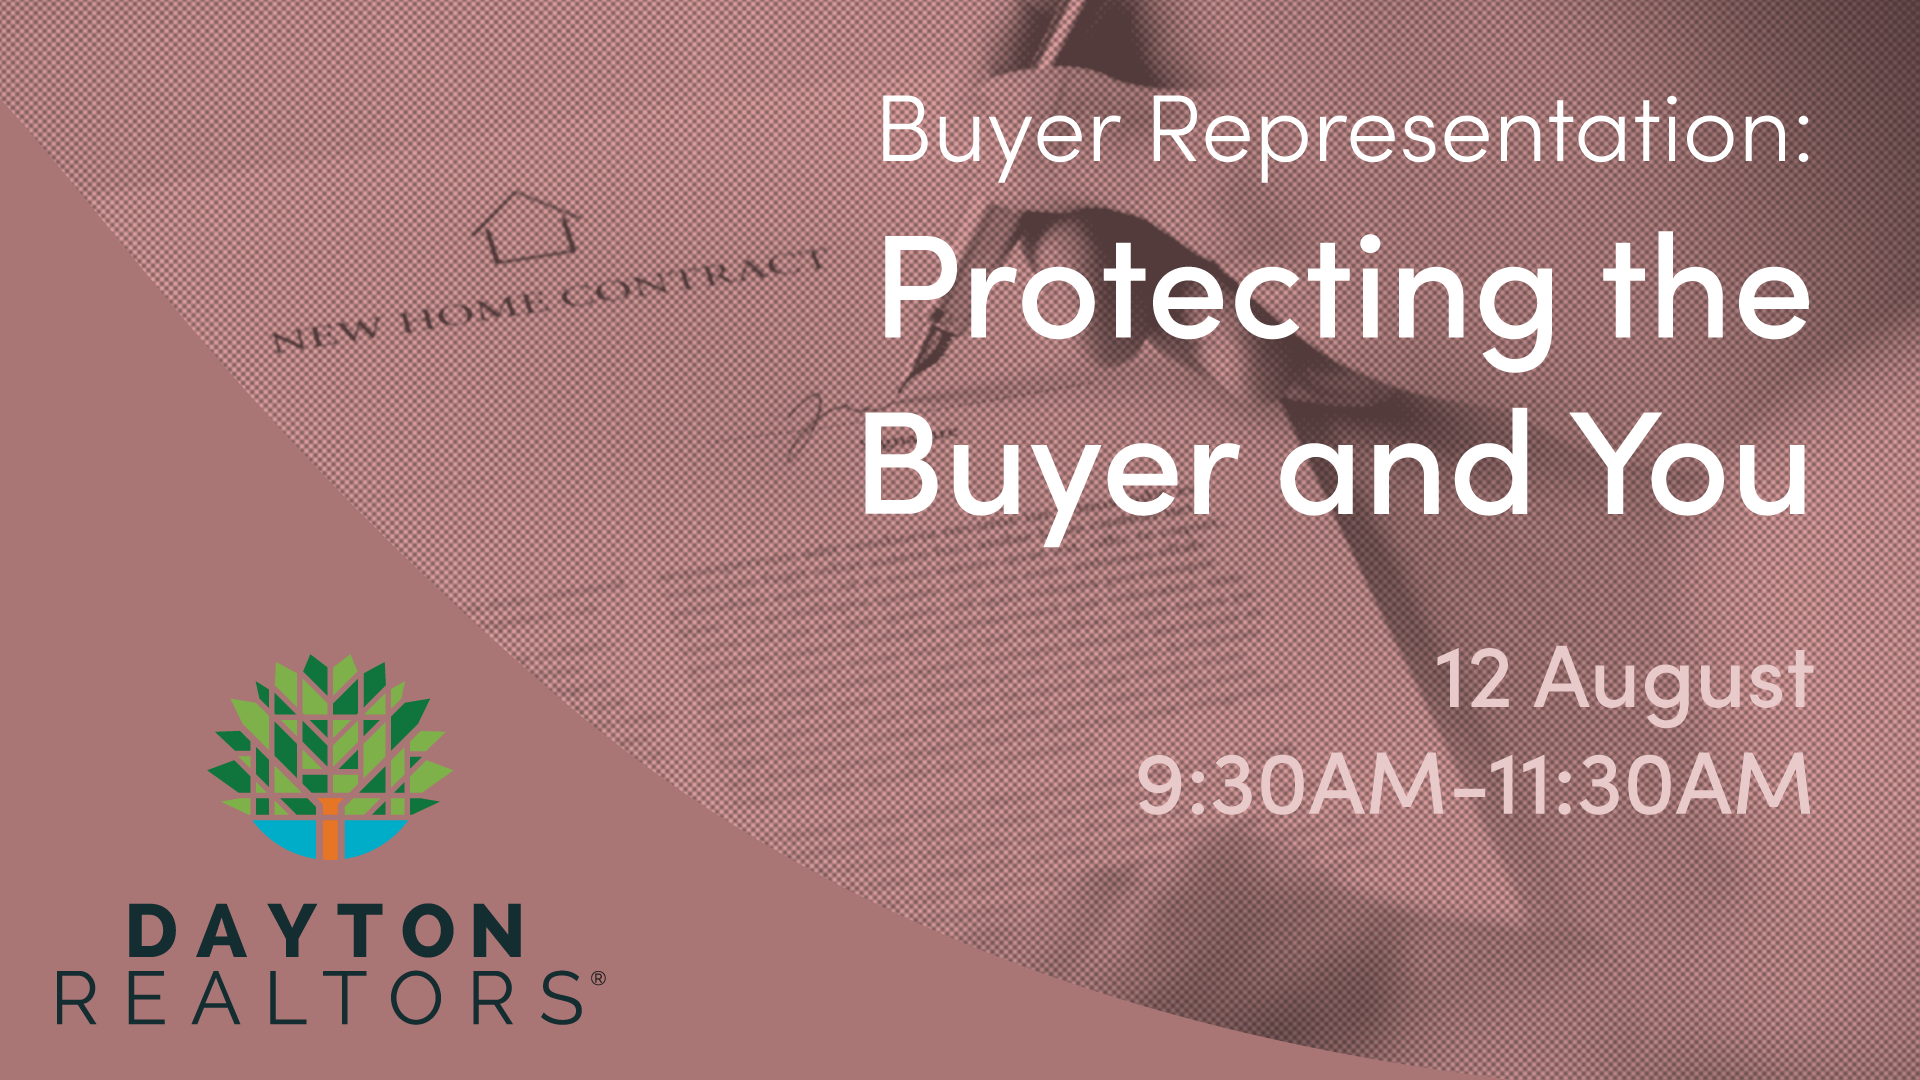 Protecting the Buyer and You